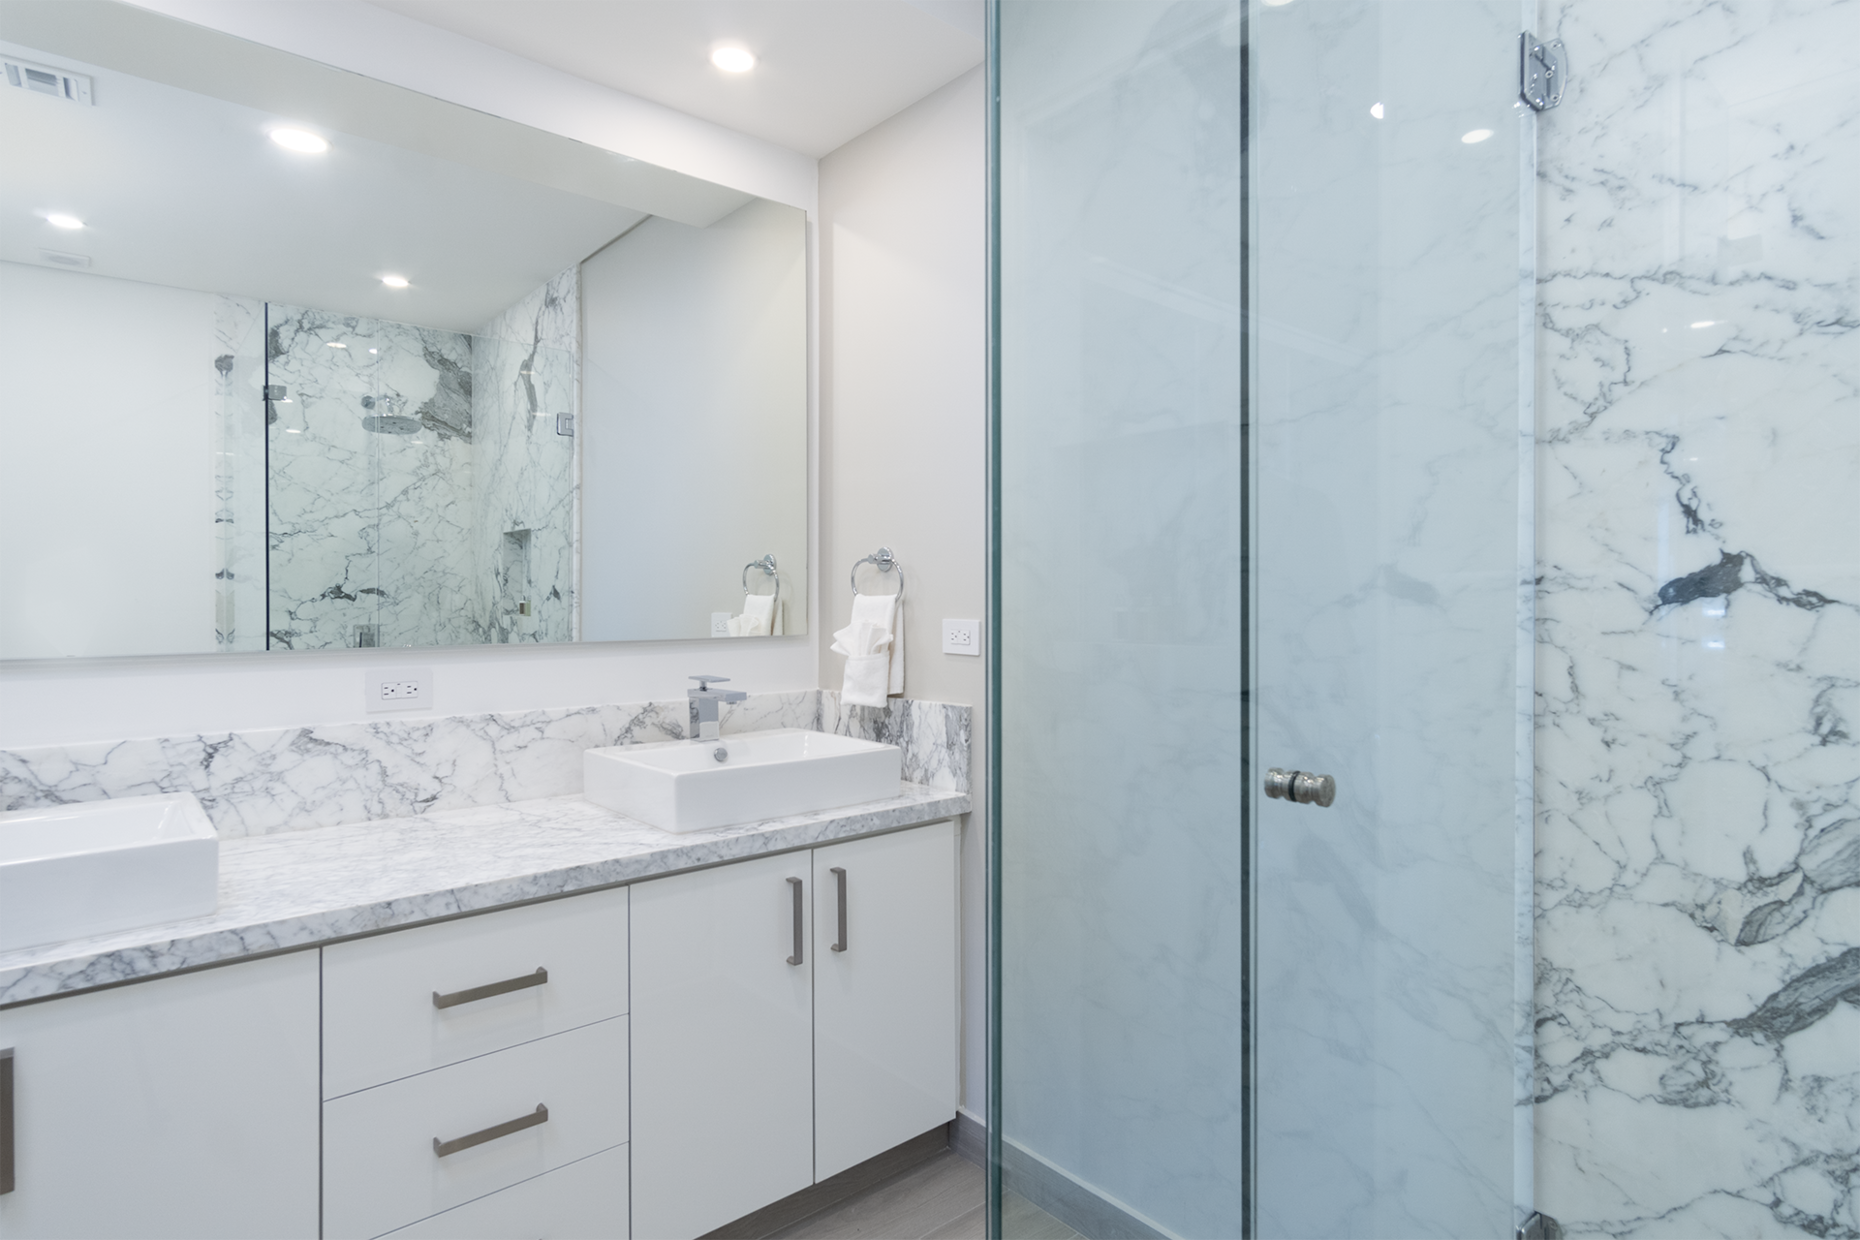 The glass shower stall with marbled walls and counter top in the main bedroom.